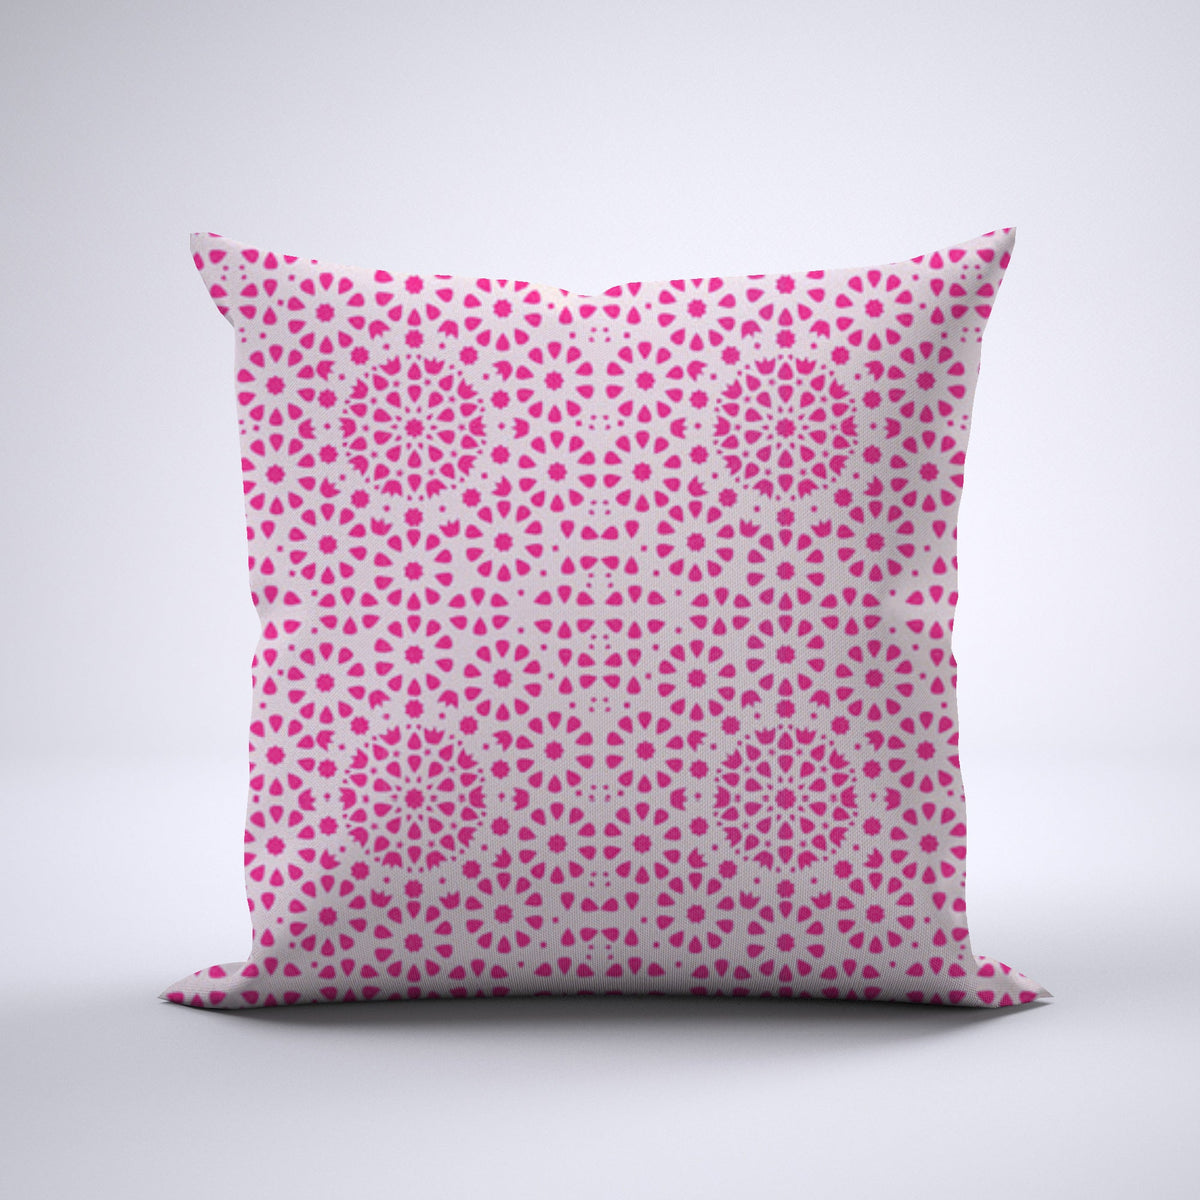 Throw Pillow - Charlotte Hot Pink Bedding Collections, Pillows, Throw Pillows MWW 